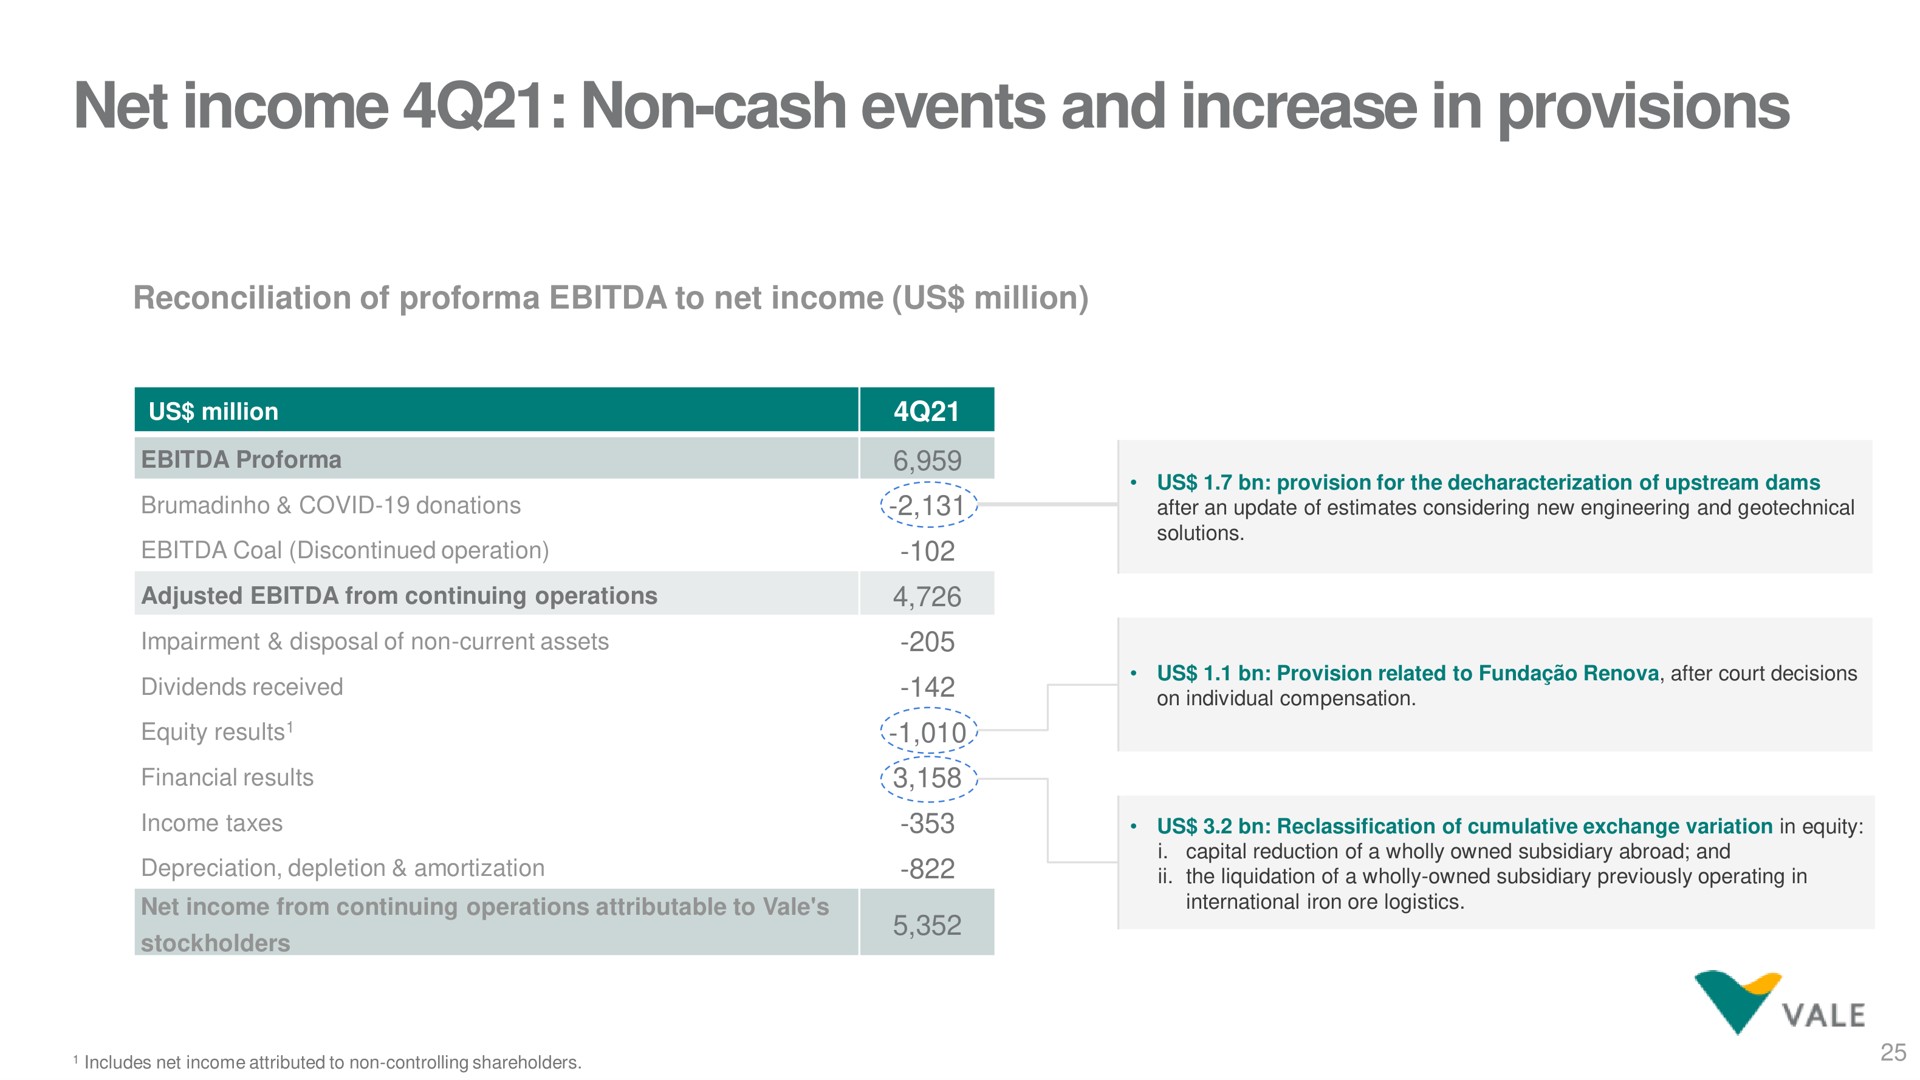 net income non cash events and increase in provisions | Vale